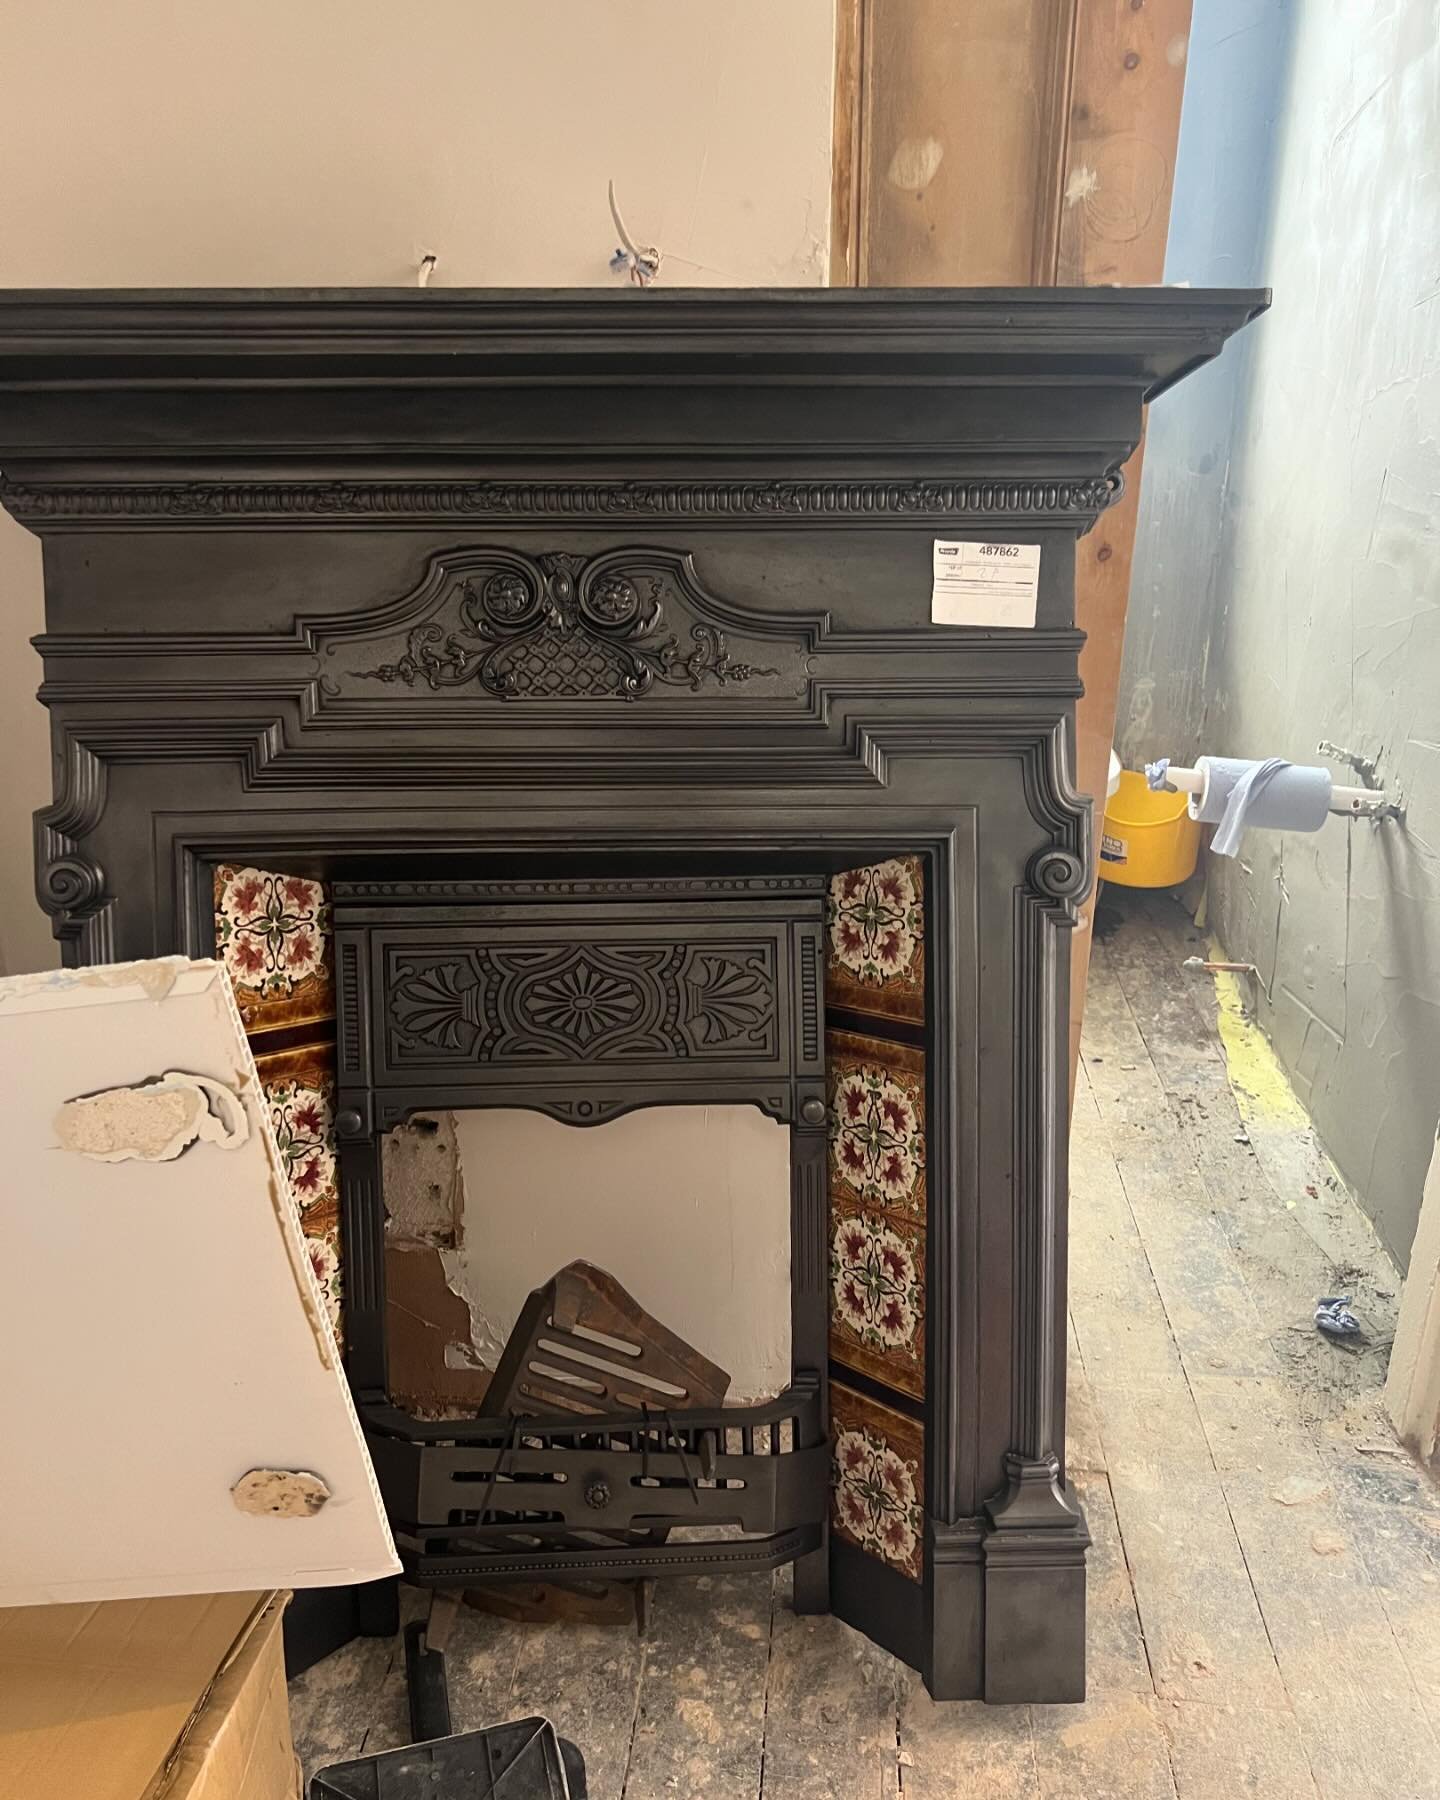 Another fireplace going back in where it belongs. Work on our #baronscourt project in full swing 👌 
.
.
.
#fireplace #restoration #periodproperty #sitevisit #periodrestoration #queensclubmansions #colourfulhome #eclectichome #colourlover #westlondon